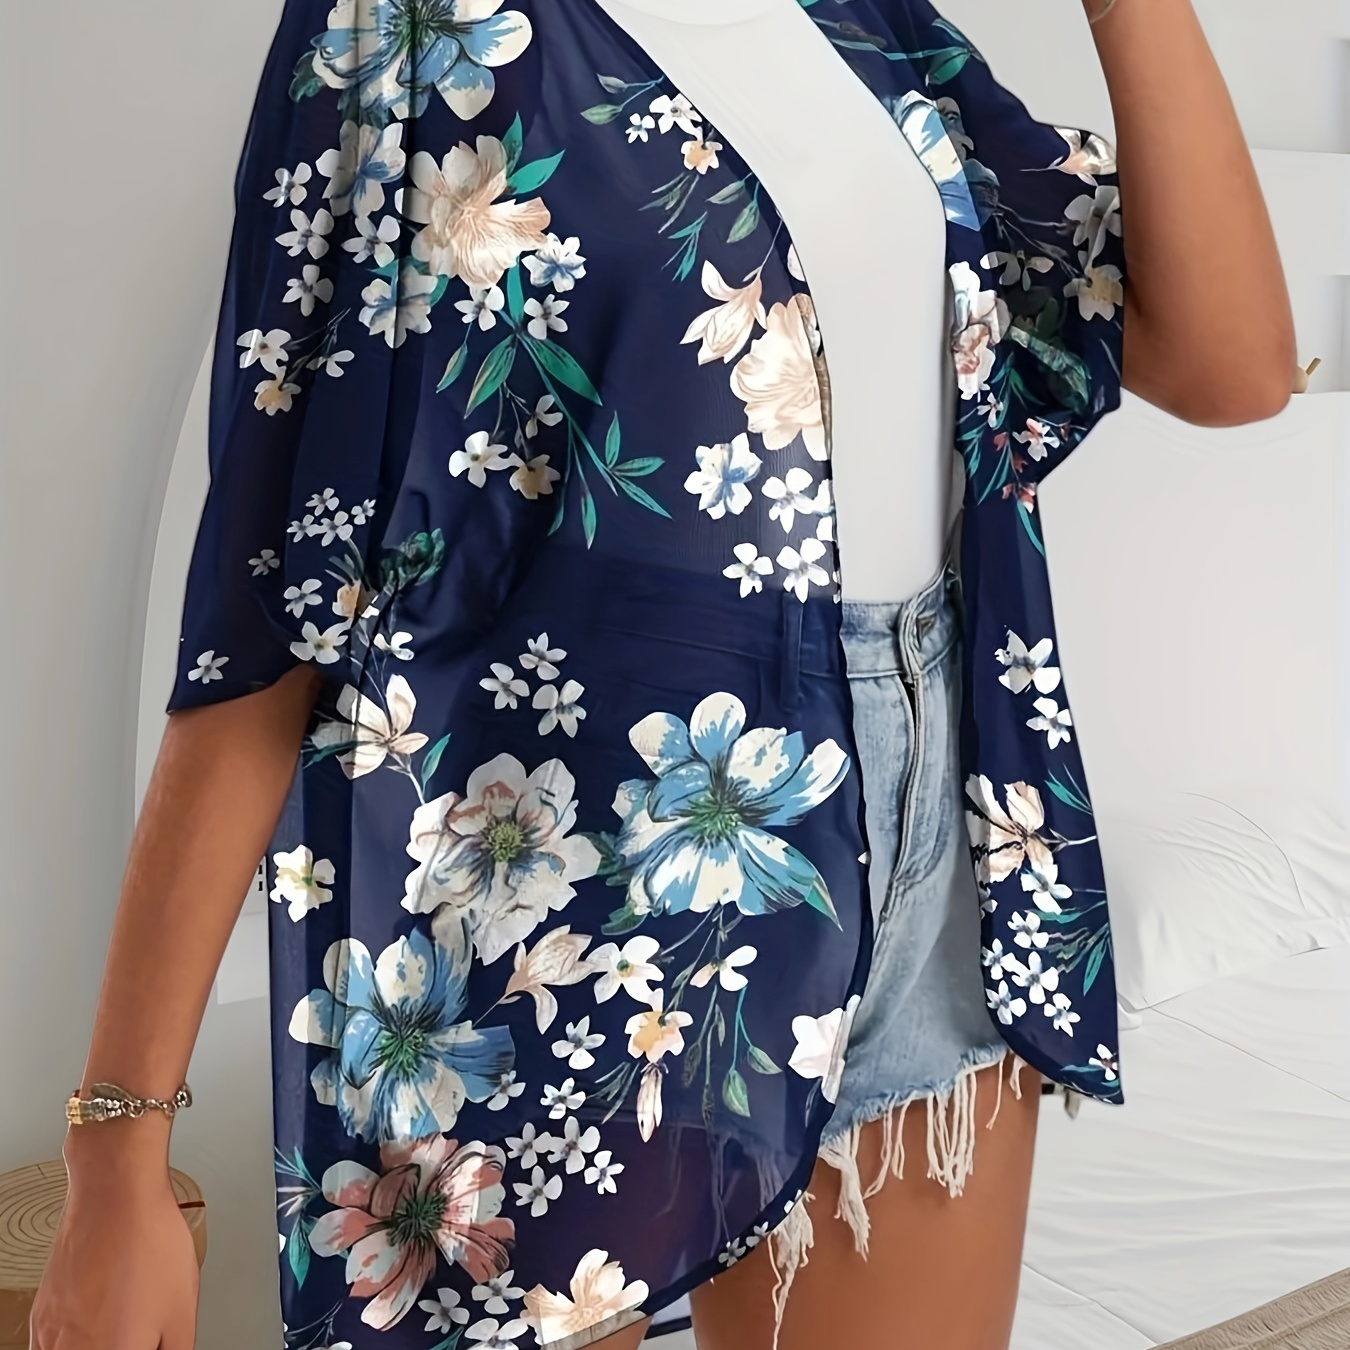 

Women's Plus Size Kimono Beach Chiffon Cardigan, Loose Fit Floral Top, Casual Style, Lightweight Summer Cover-up